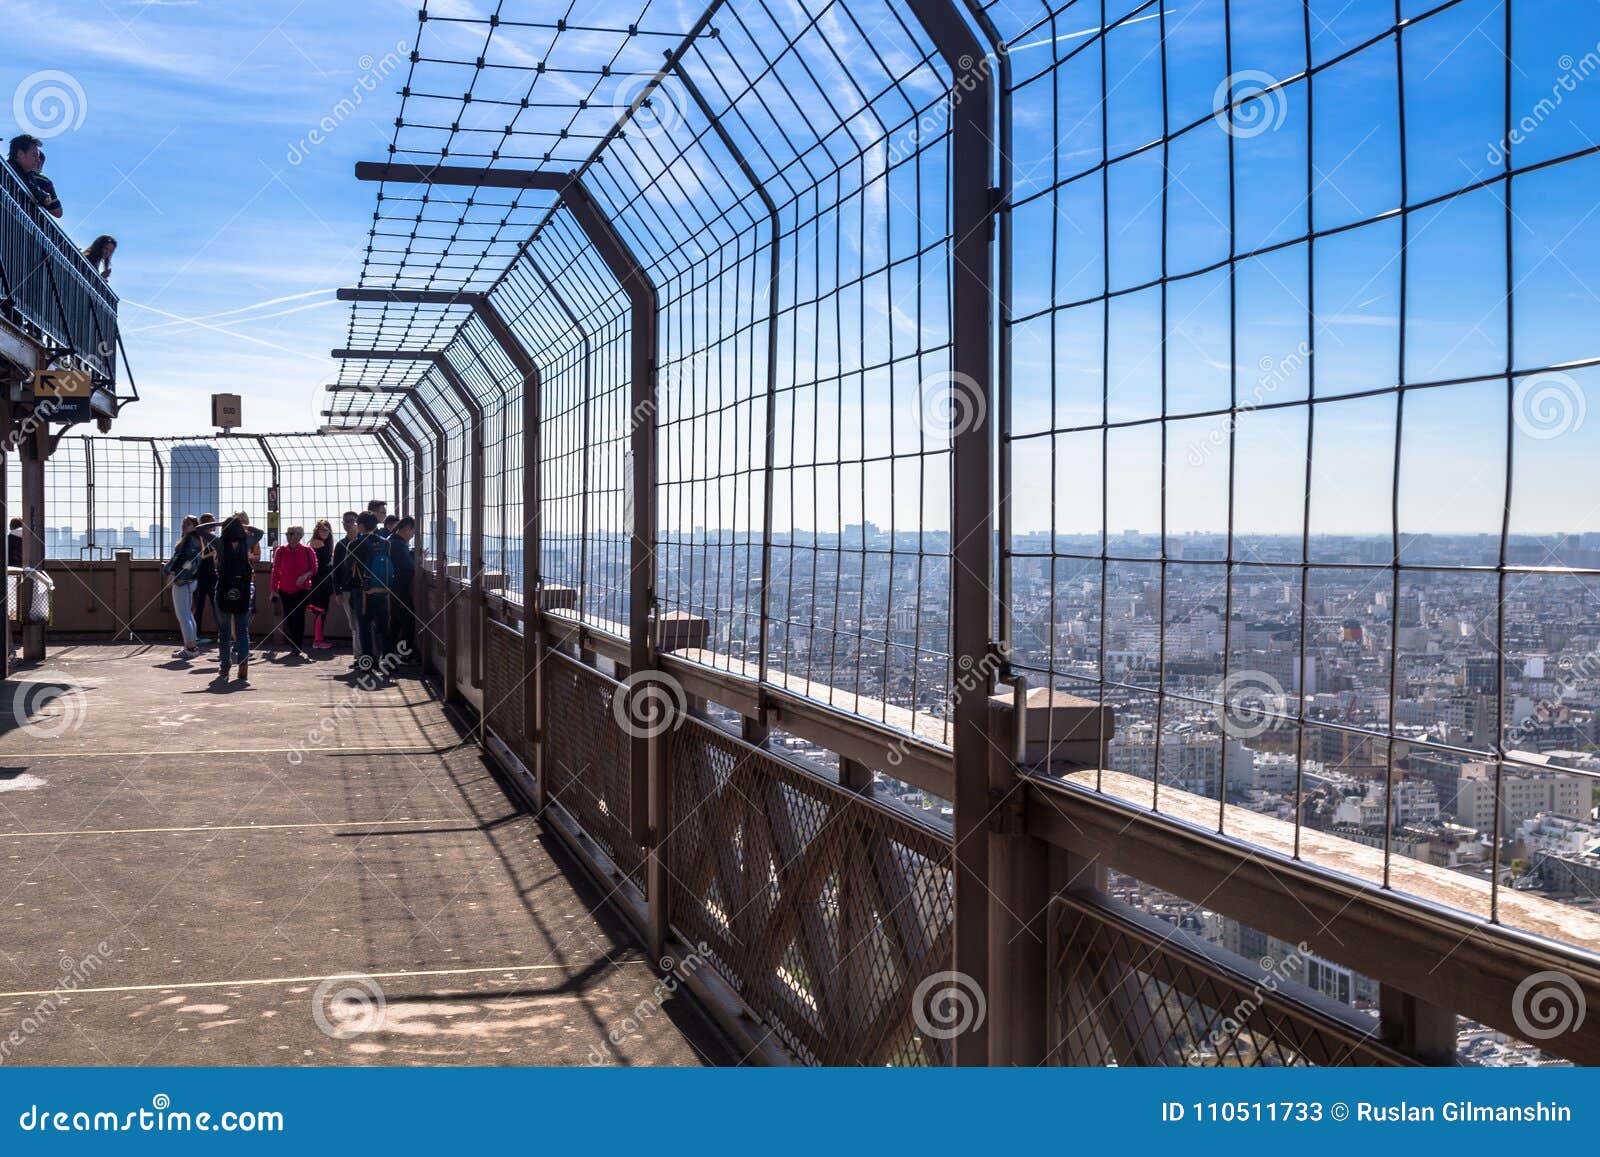 Paris, France - March 30, 2017: Top of the Eiffel Tower. this is